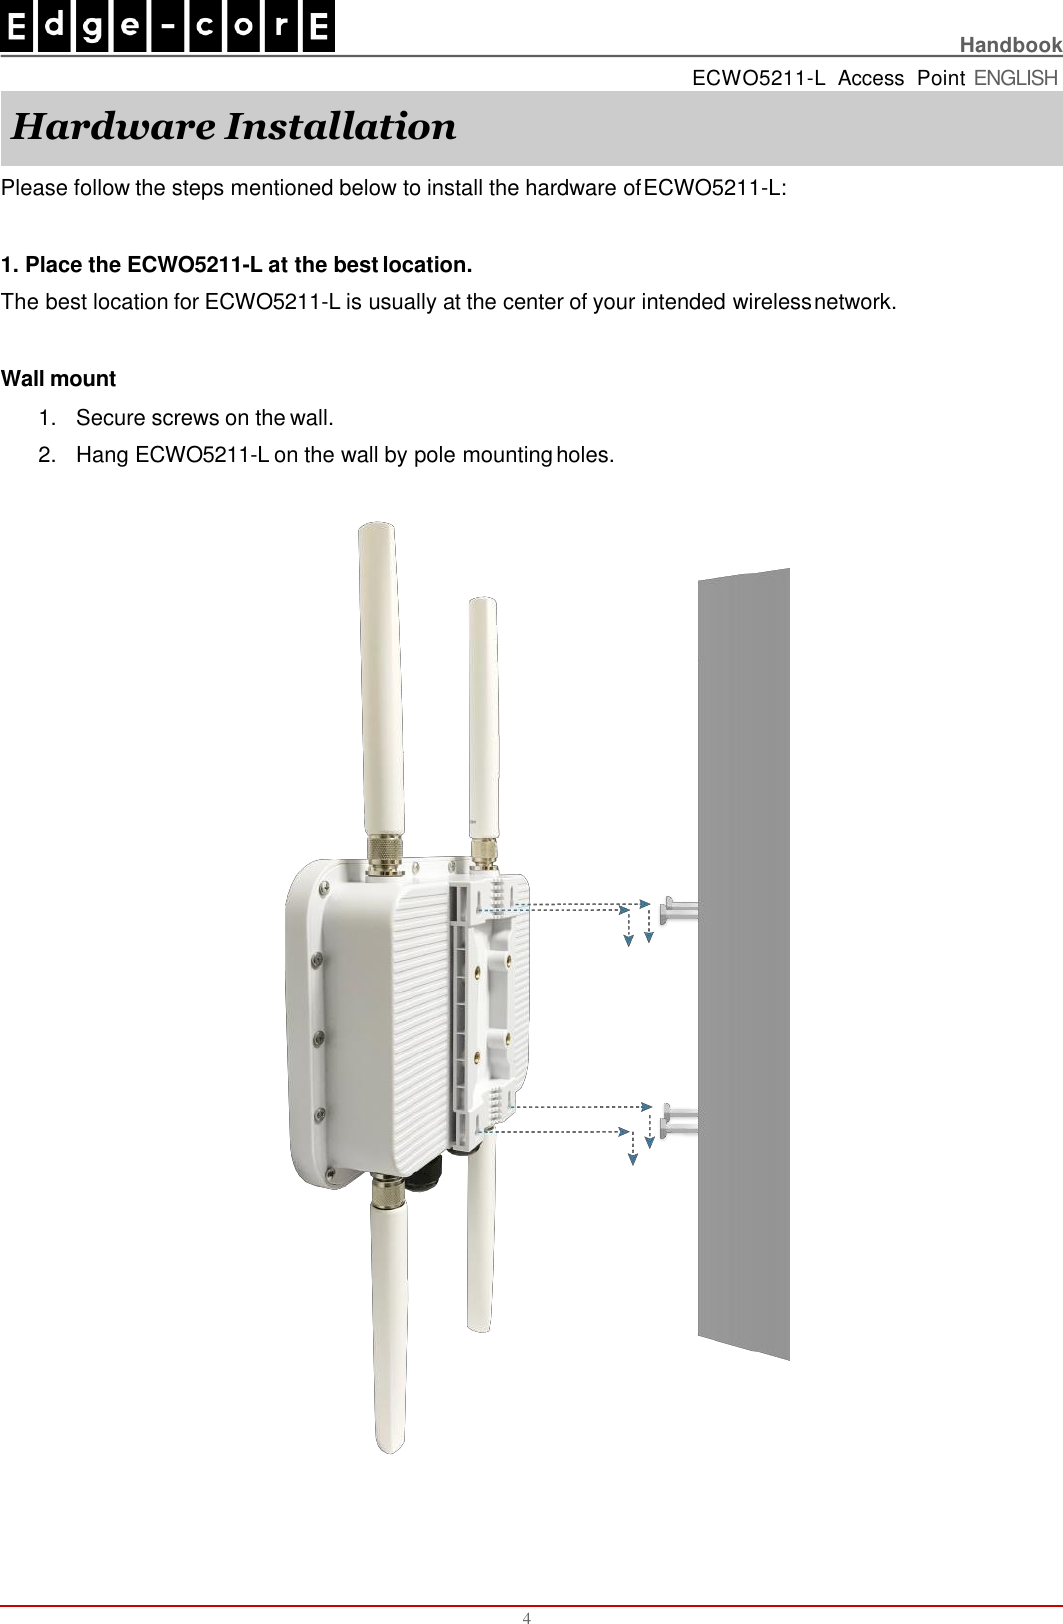    Handbook ECWO5211-L  Access  Point ENGLISH Hardware Installation Please follow the steps mentioned below to install the hardware of ECWO5211-L:  1. Place the ECWO5211-L at the best location. The best location for ECWO5211-L is usually at the center of your intended wireless network.  Wall mount 1. Secure screws on the wall. 2. Hang ECWO5211-L on the wall by pole mounting holes. 4 